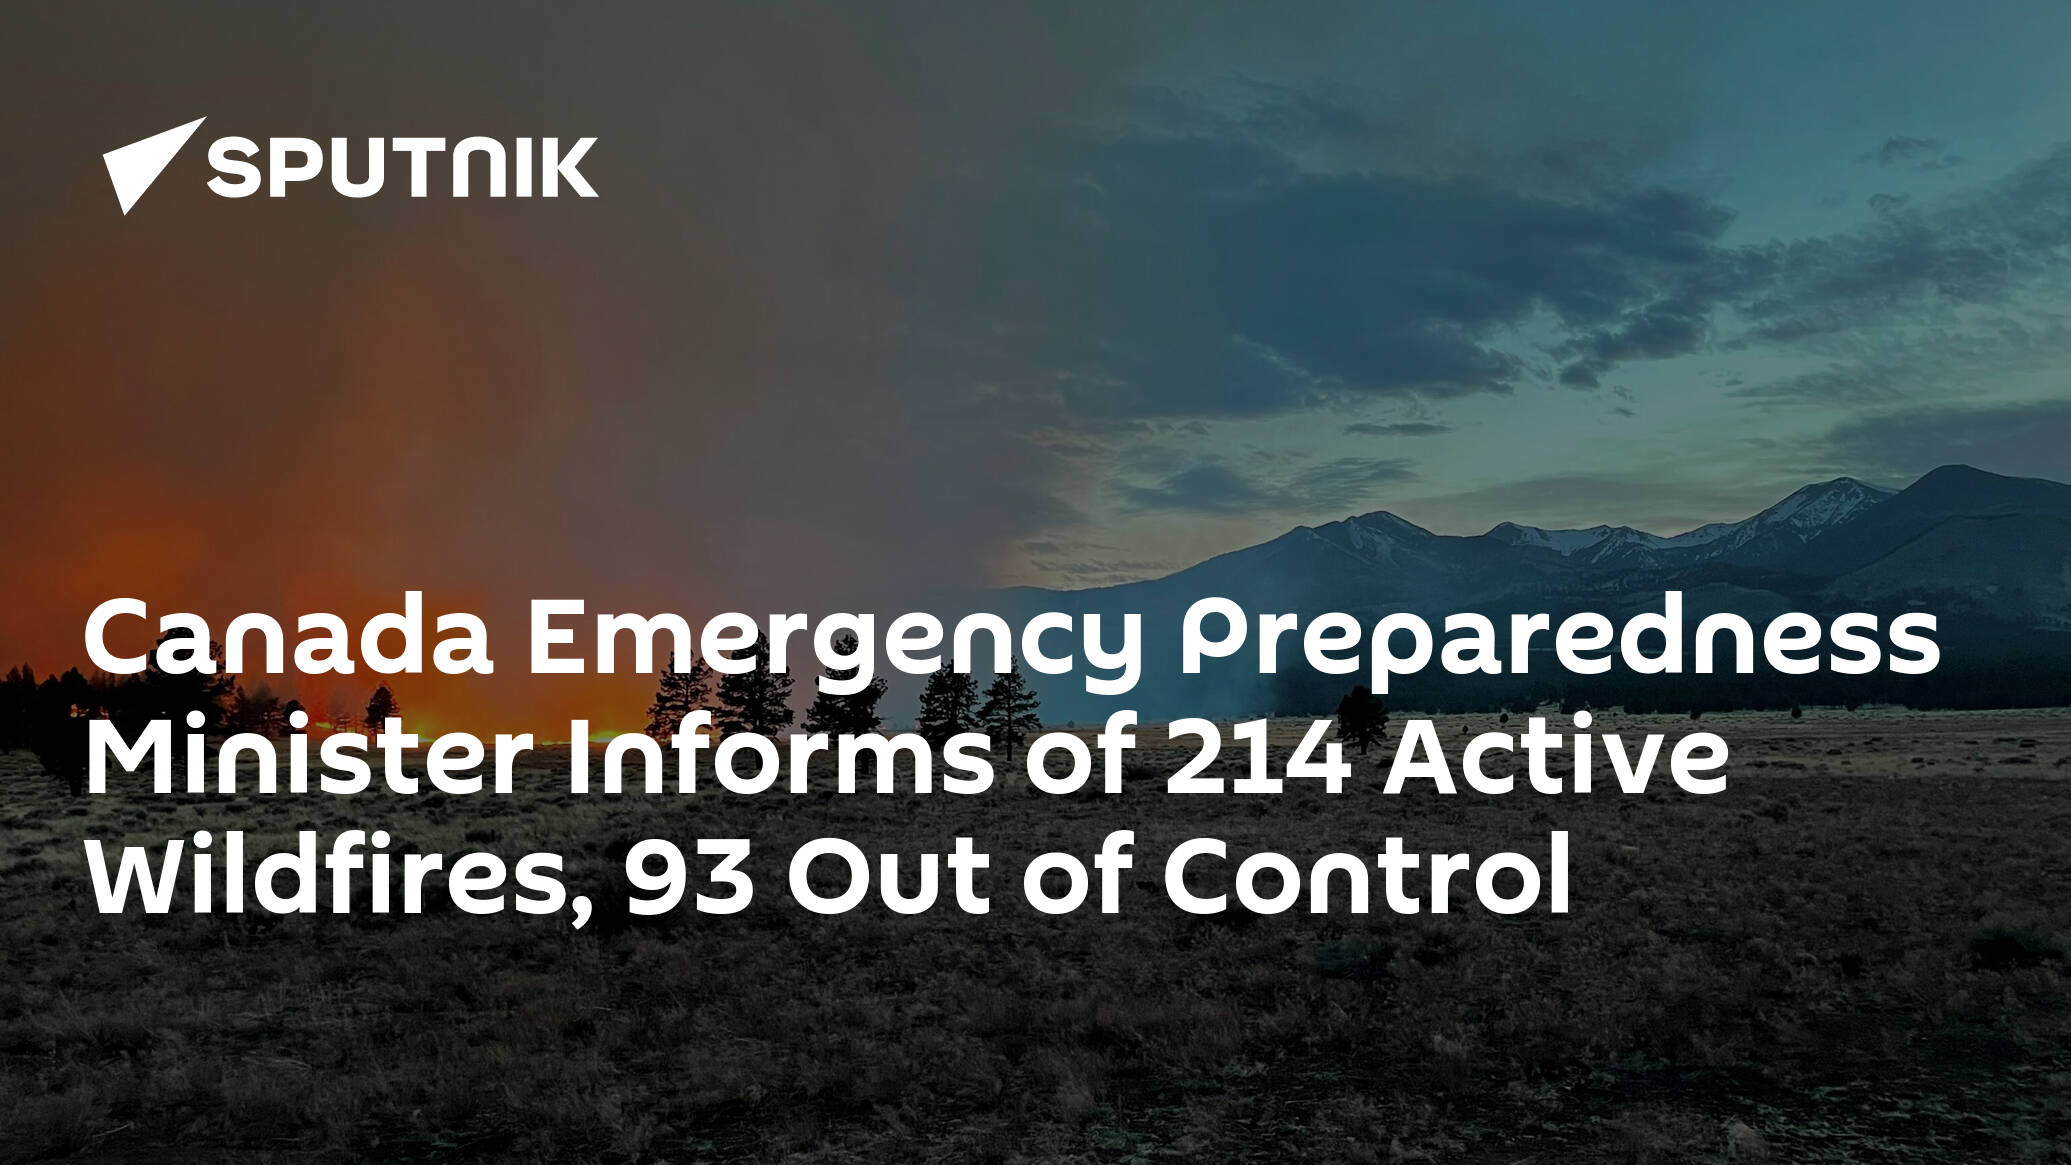 Canada Emergency Preparedness Minister Informs of 214 Active Wildfires, 93 Out of Control